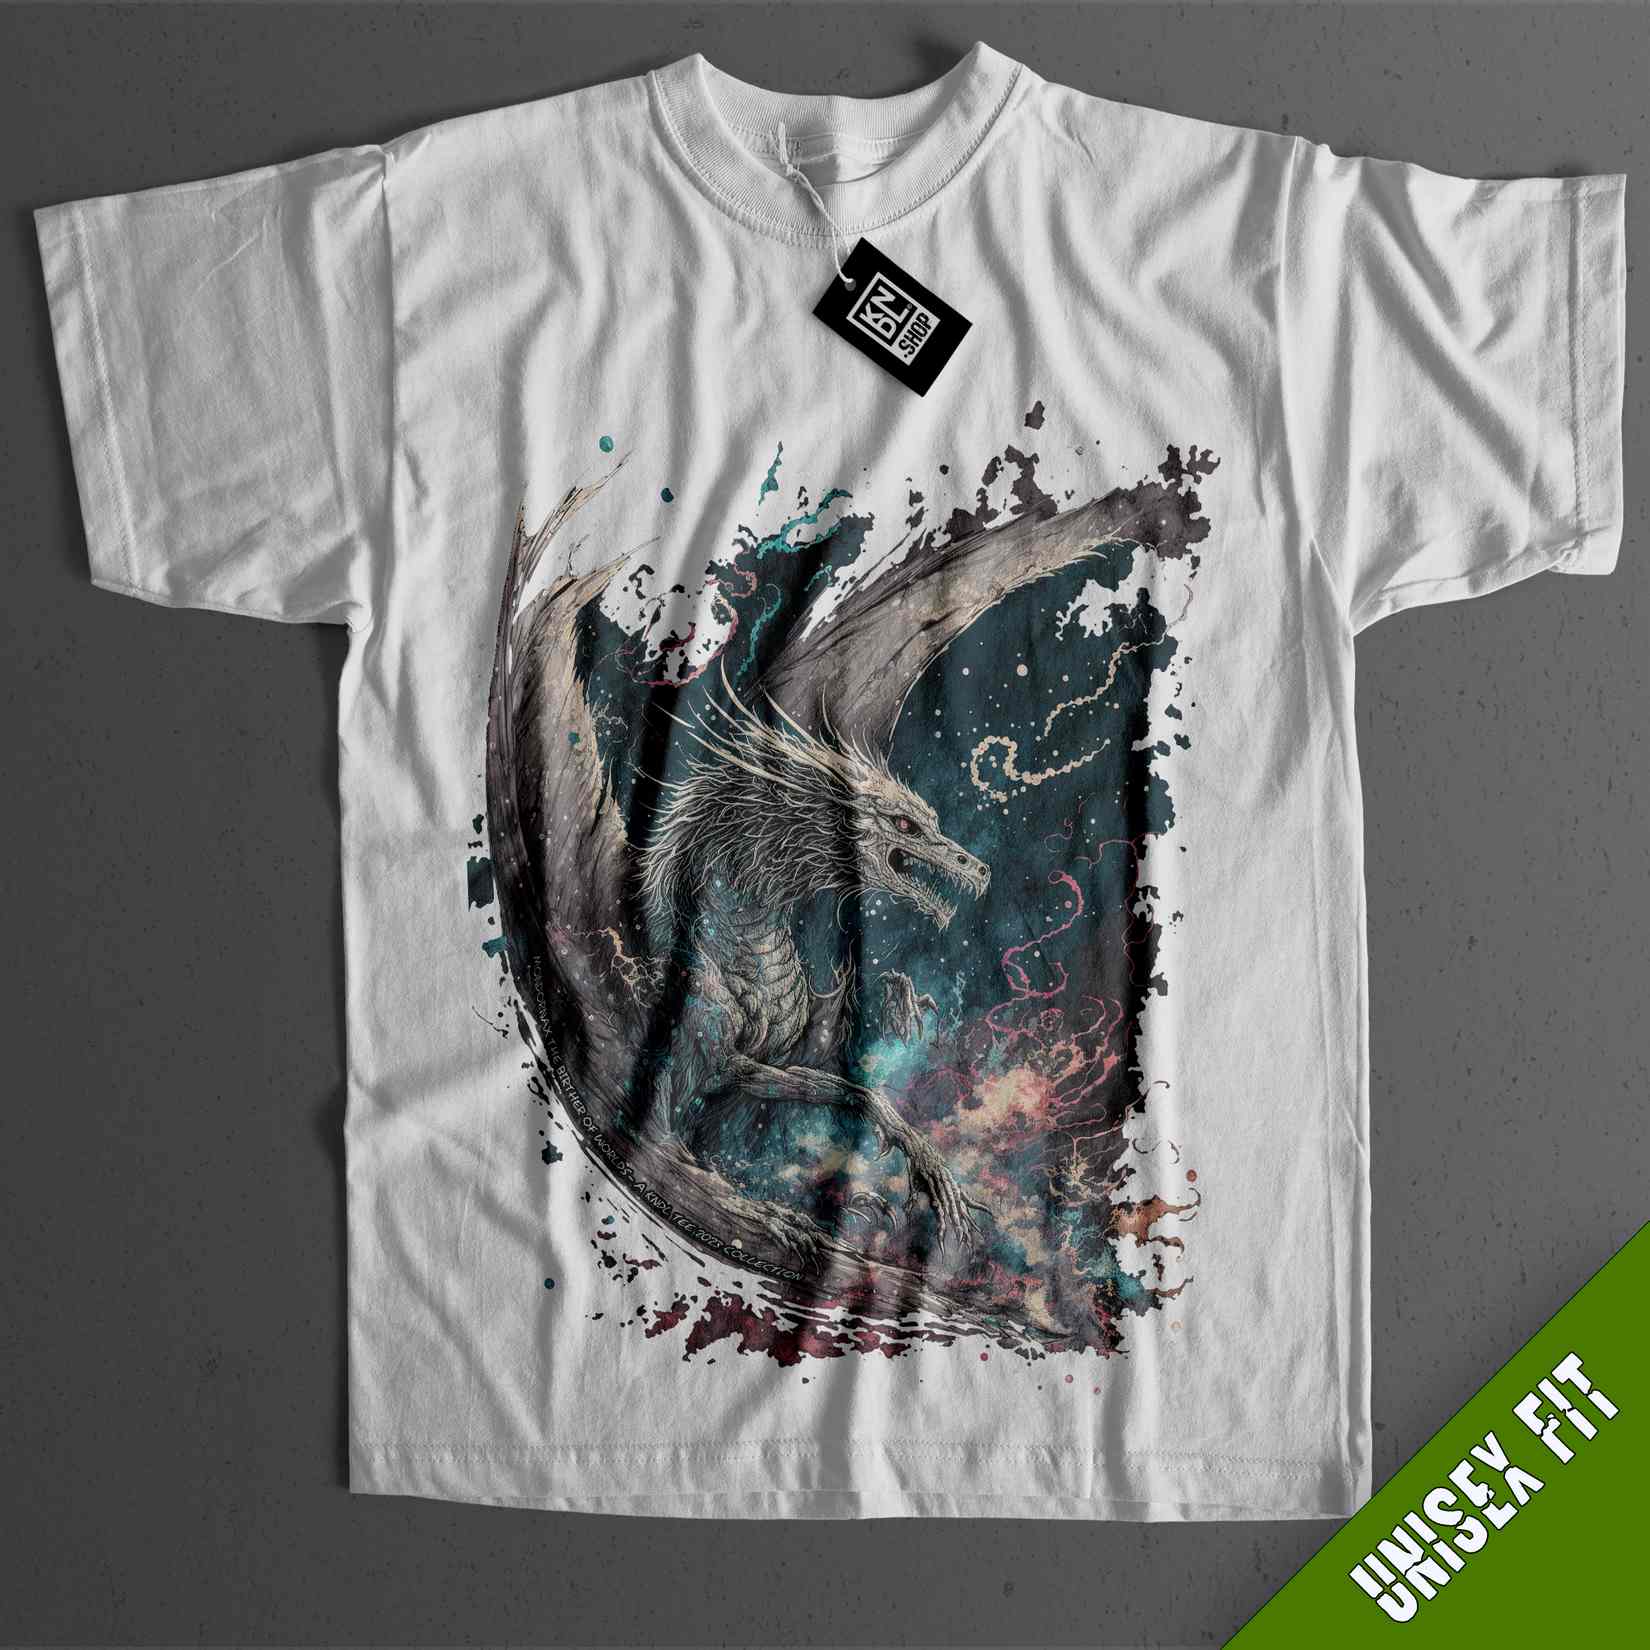 a white t - shirt with a picture of a dragon on it